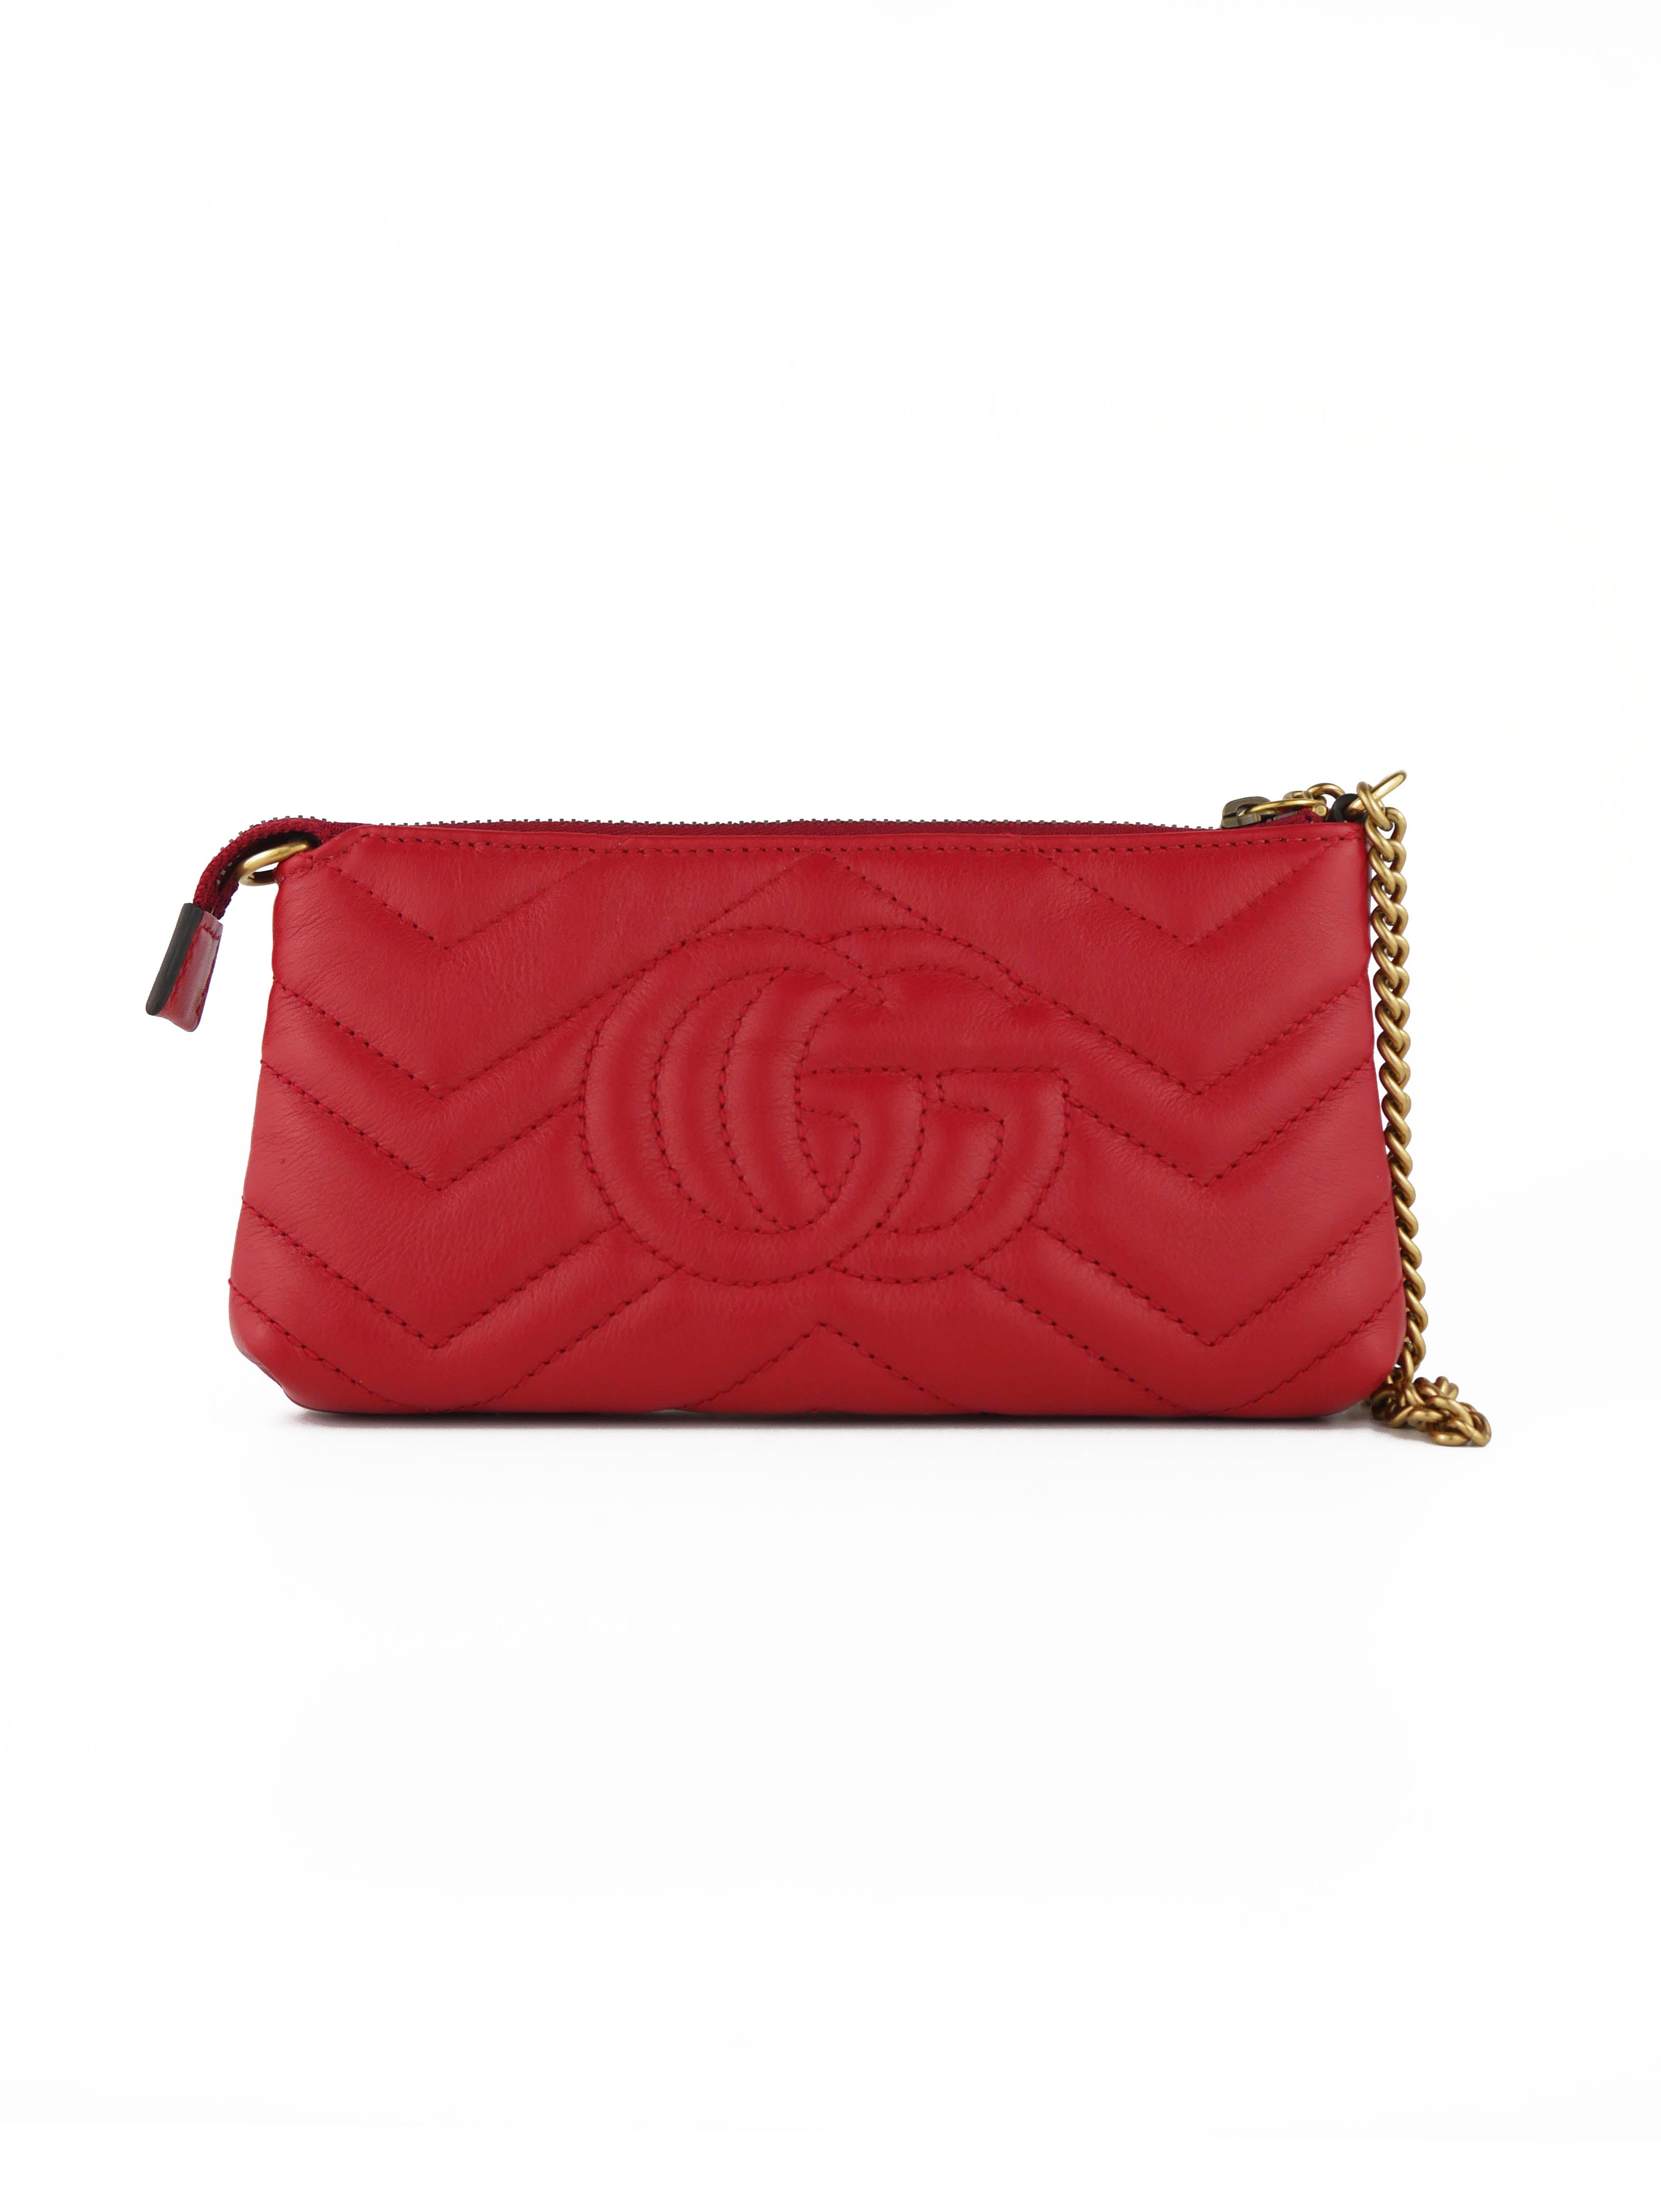 gucci-red-quilted-wallet-on-chain-7.jpg